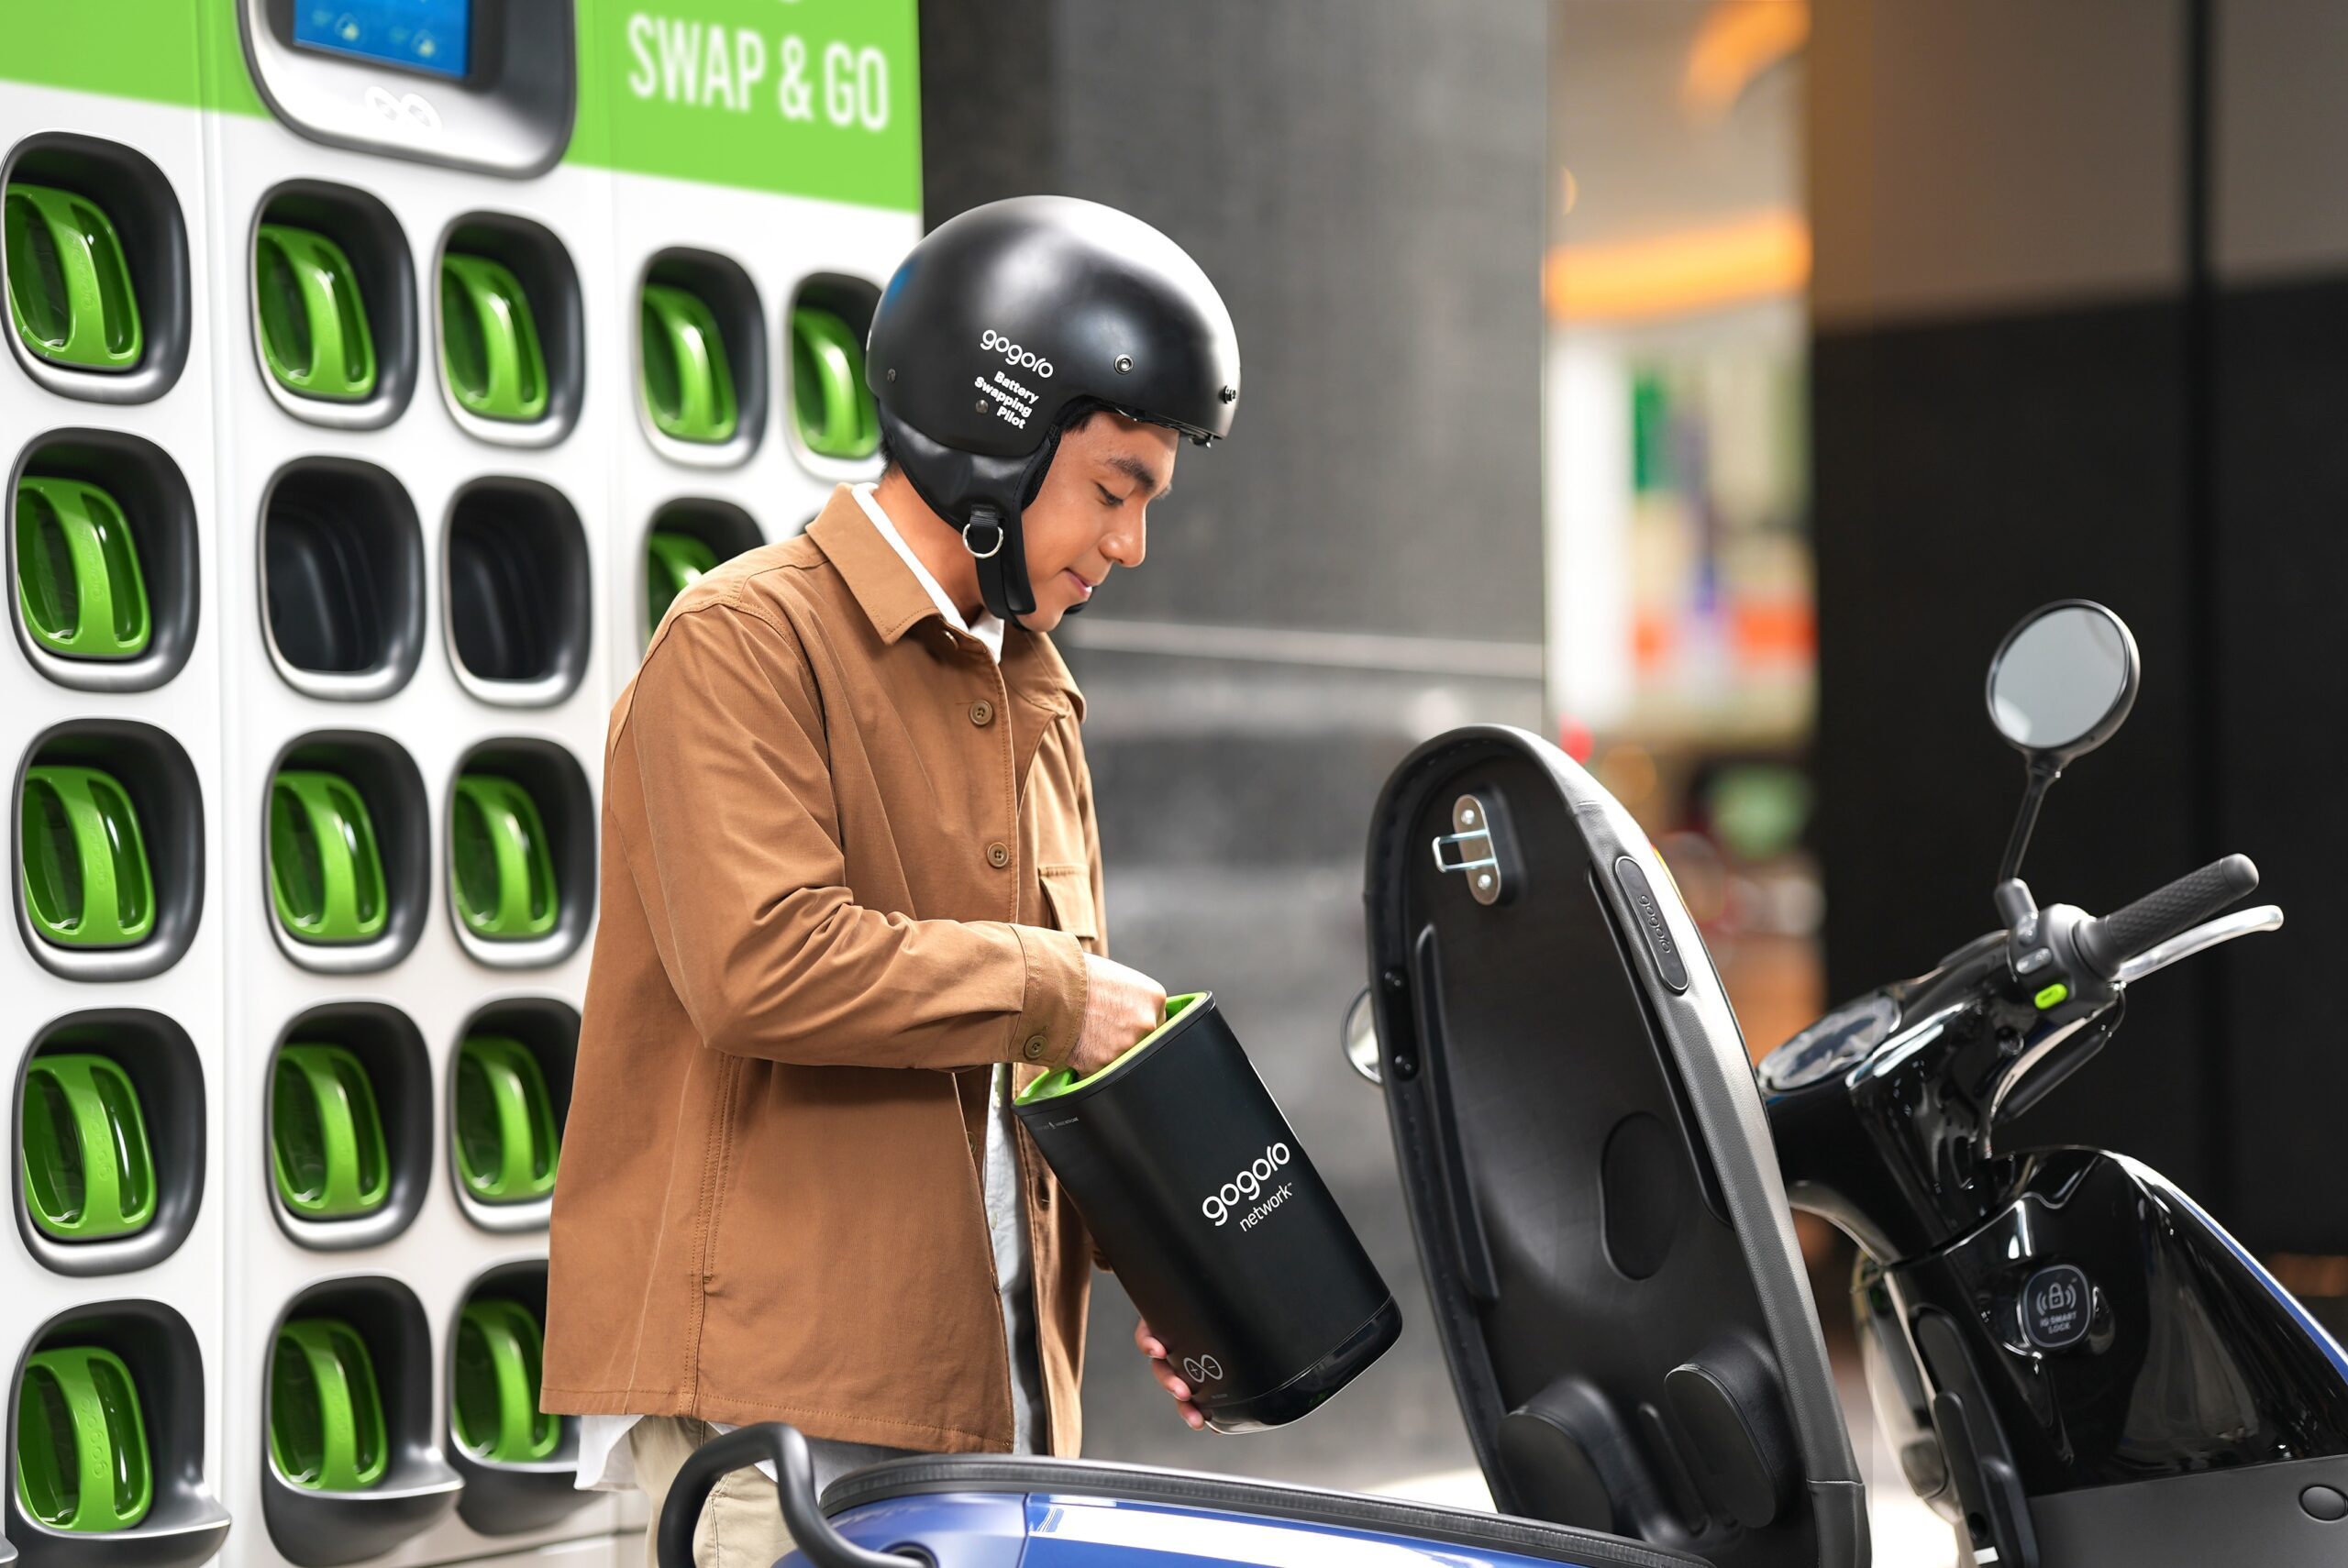 Gogoro e-scooters are coming to the Philippines in 2023